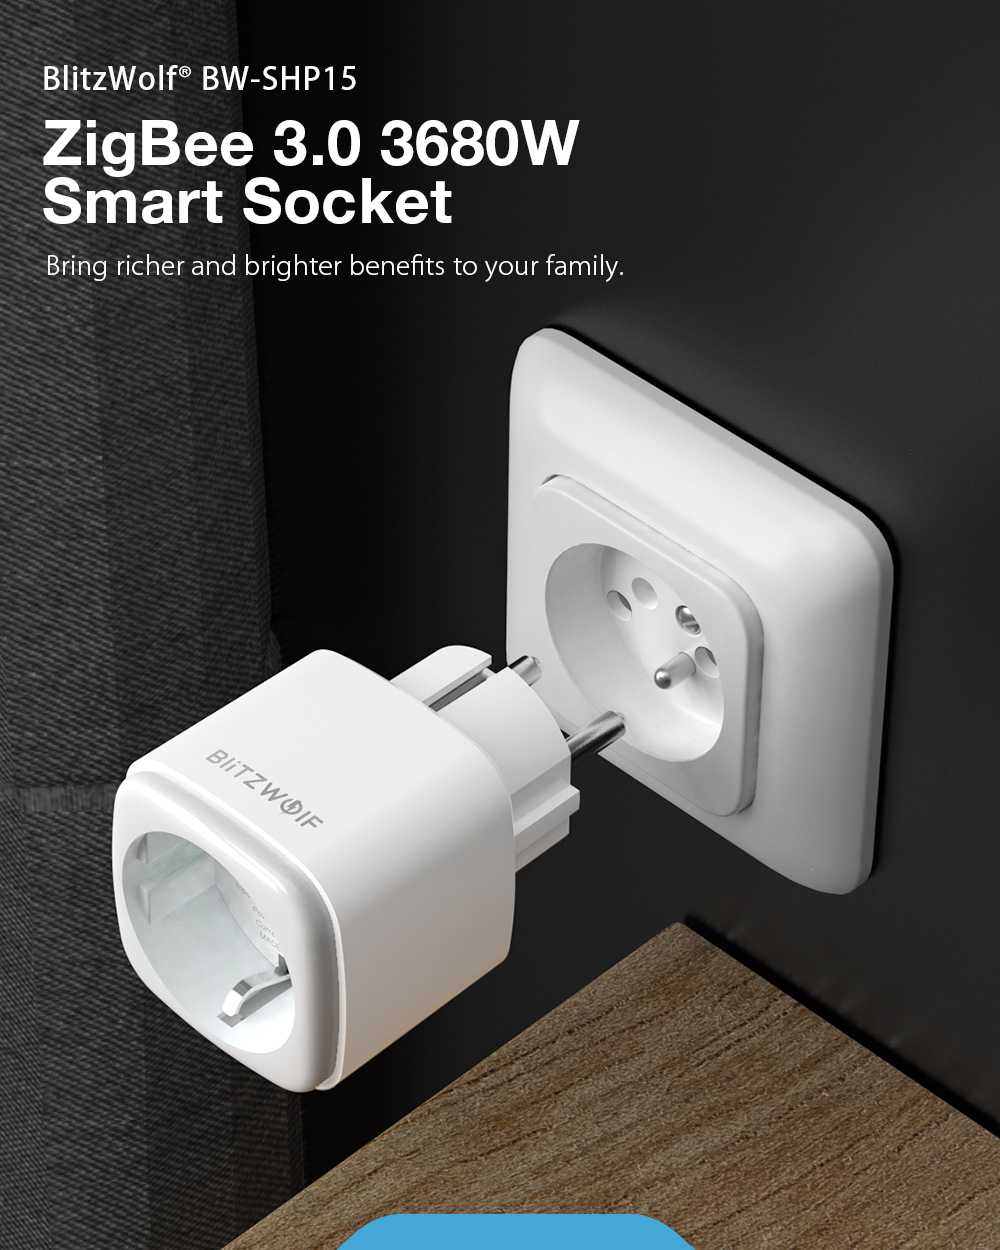 [4 Pcs] BlitzWolf® BW-SHP15 Zigbee 3.0 16A 3680W Smart Plug Wireless Power Socket Outlet EU Plug APP Remote Control / Voice Control / Multiple Timer Modes Compatible With Amazon Alexa / Google Assistant